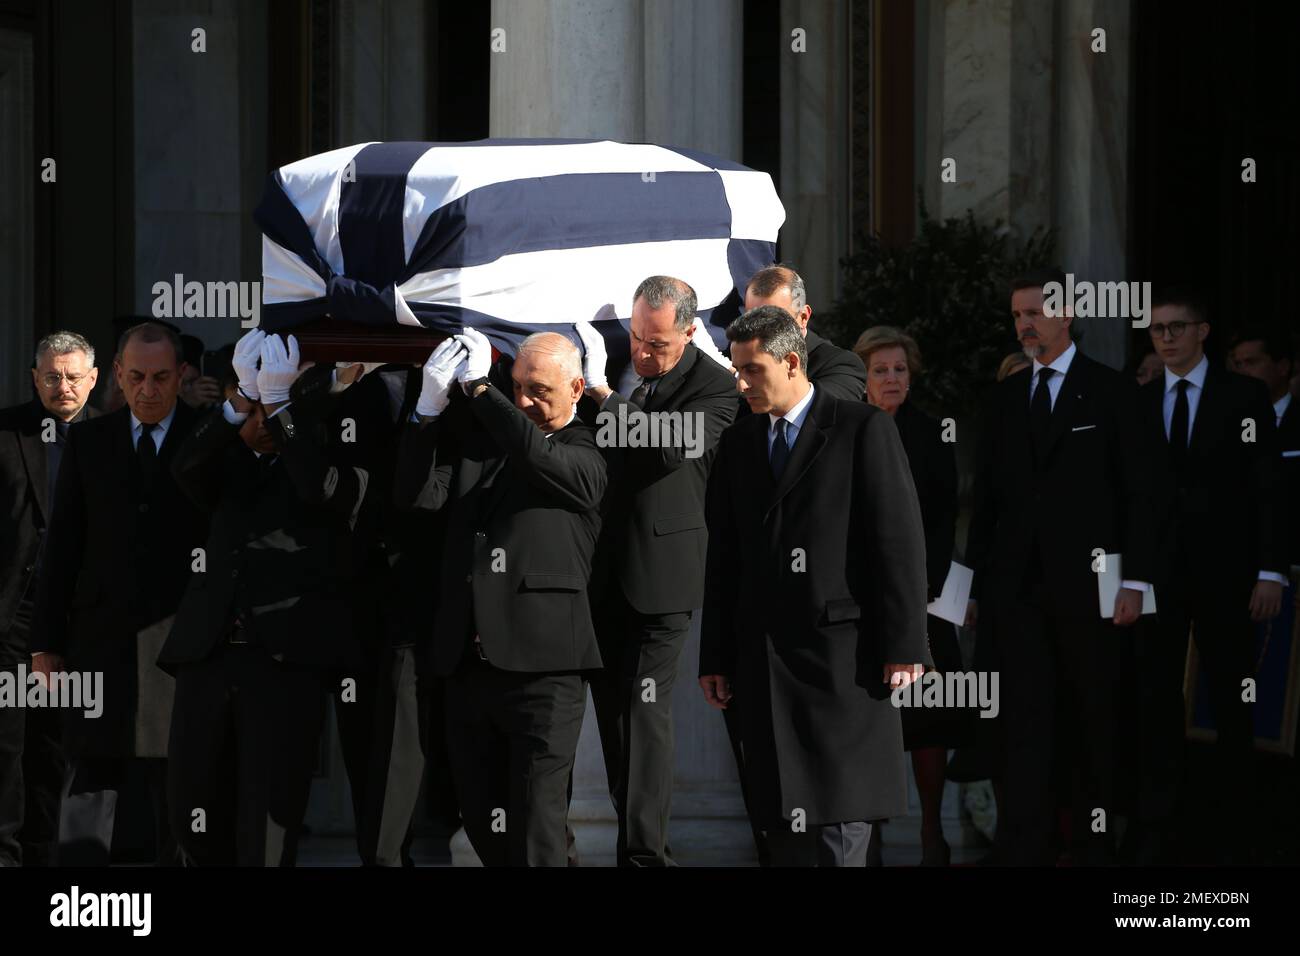 The coffin is carried out of the Cathedral during the funeral for former King Constantine II of Greece. Stock Photo